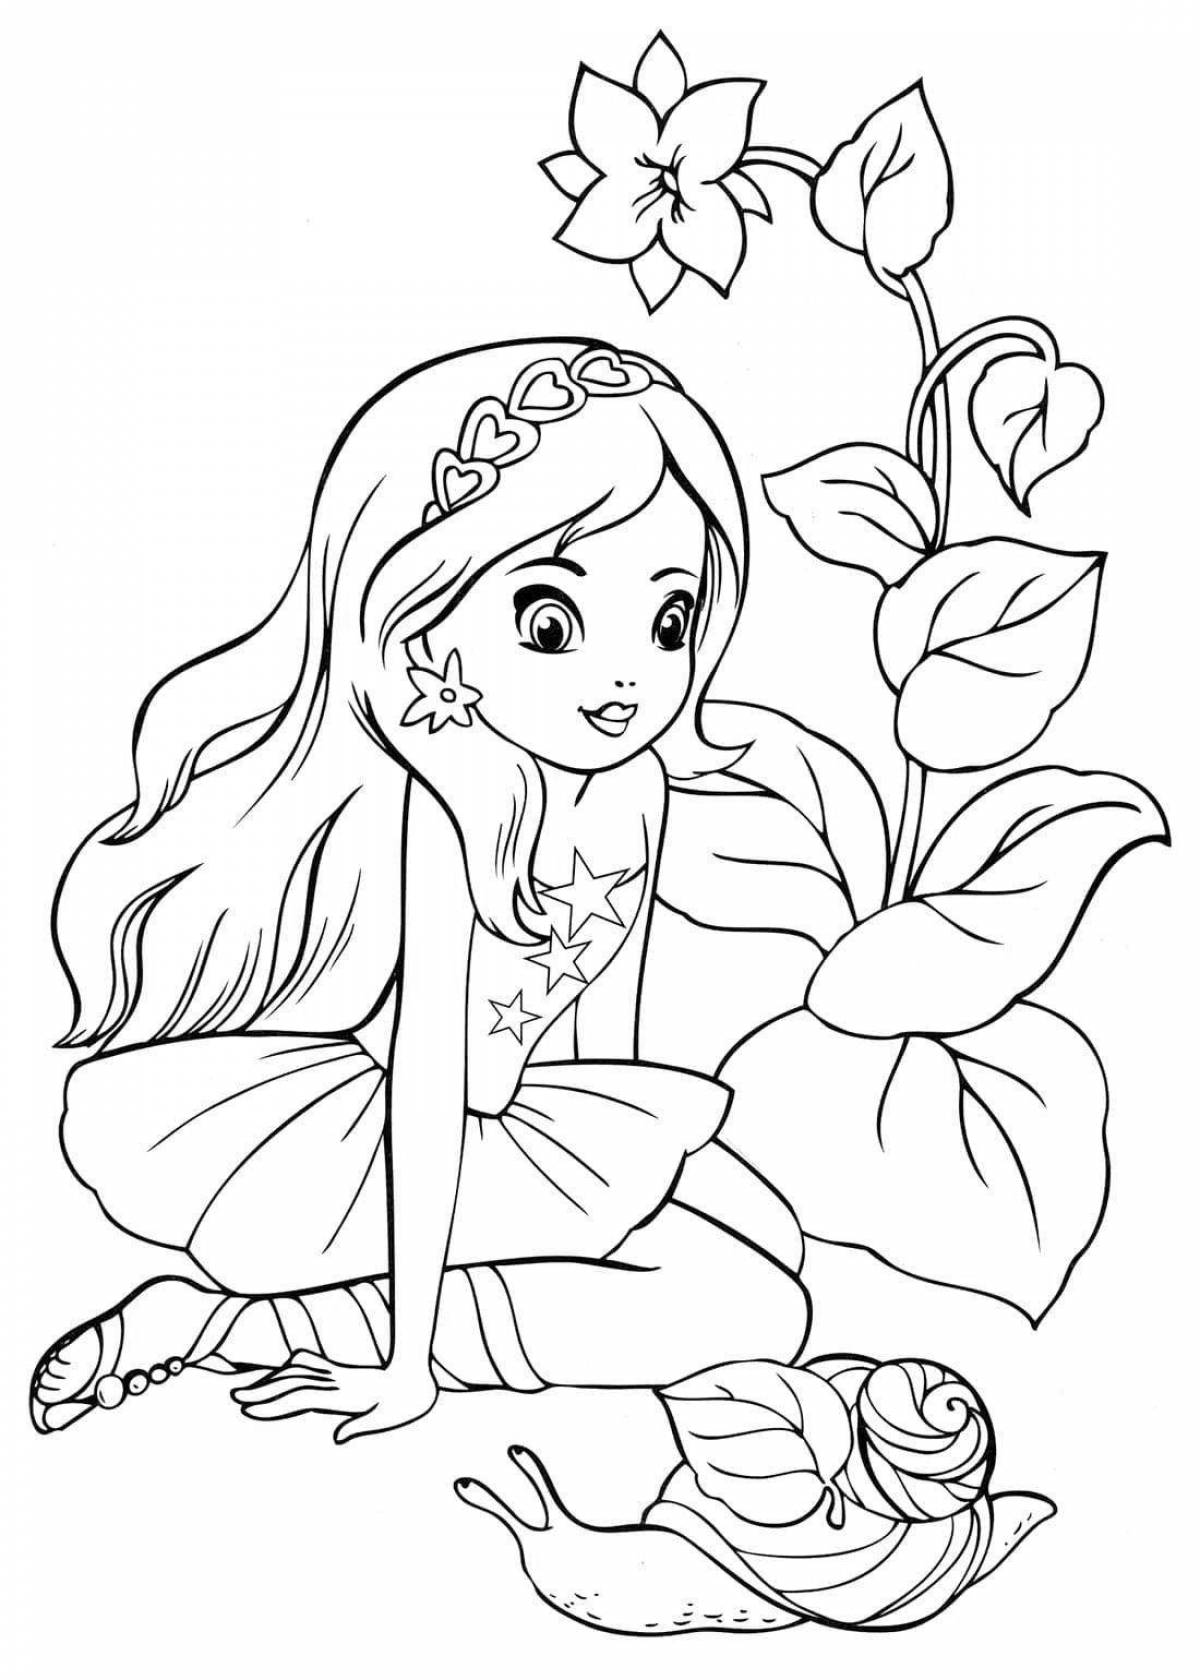 Overflowing with color 7 year old coloring pages